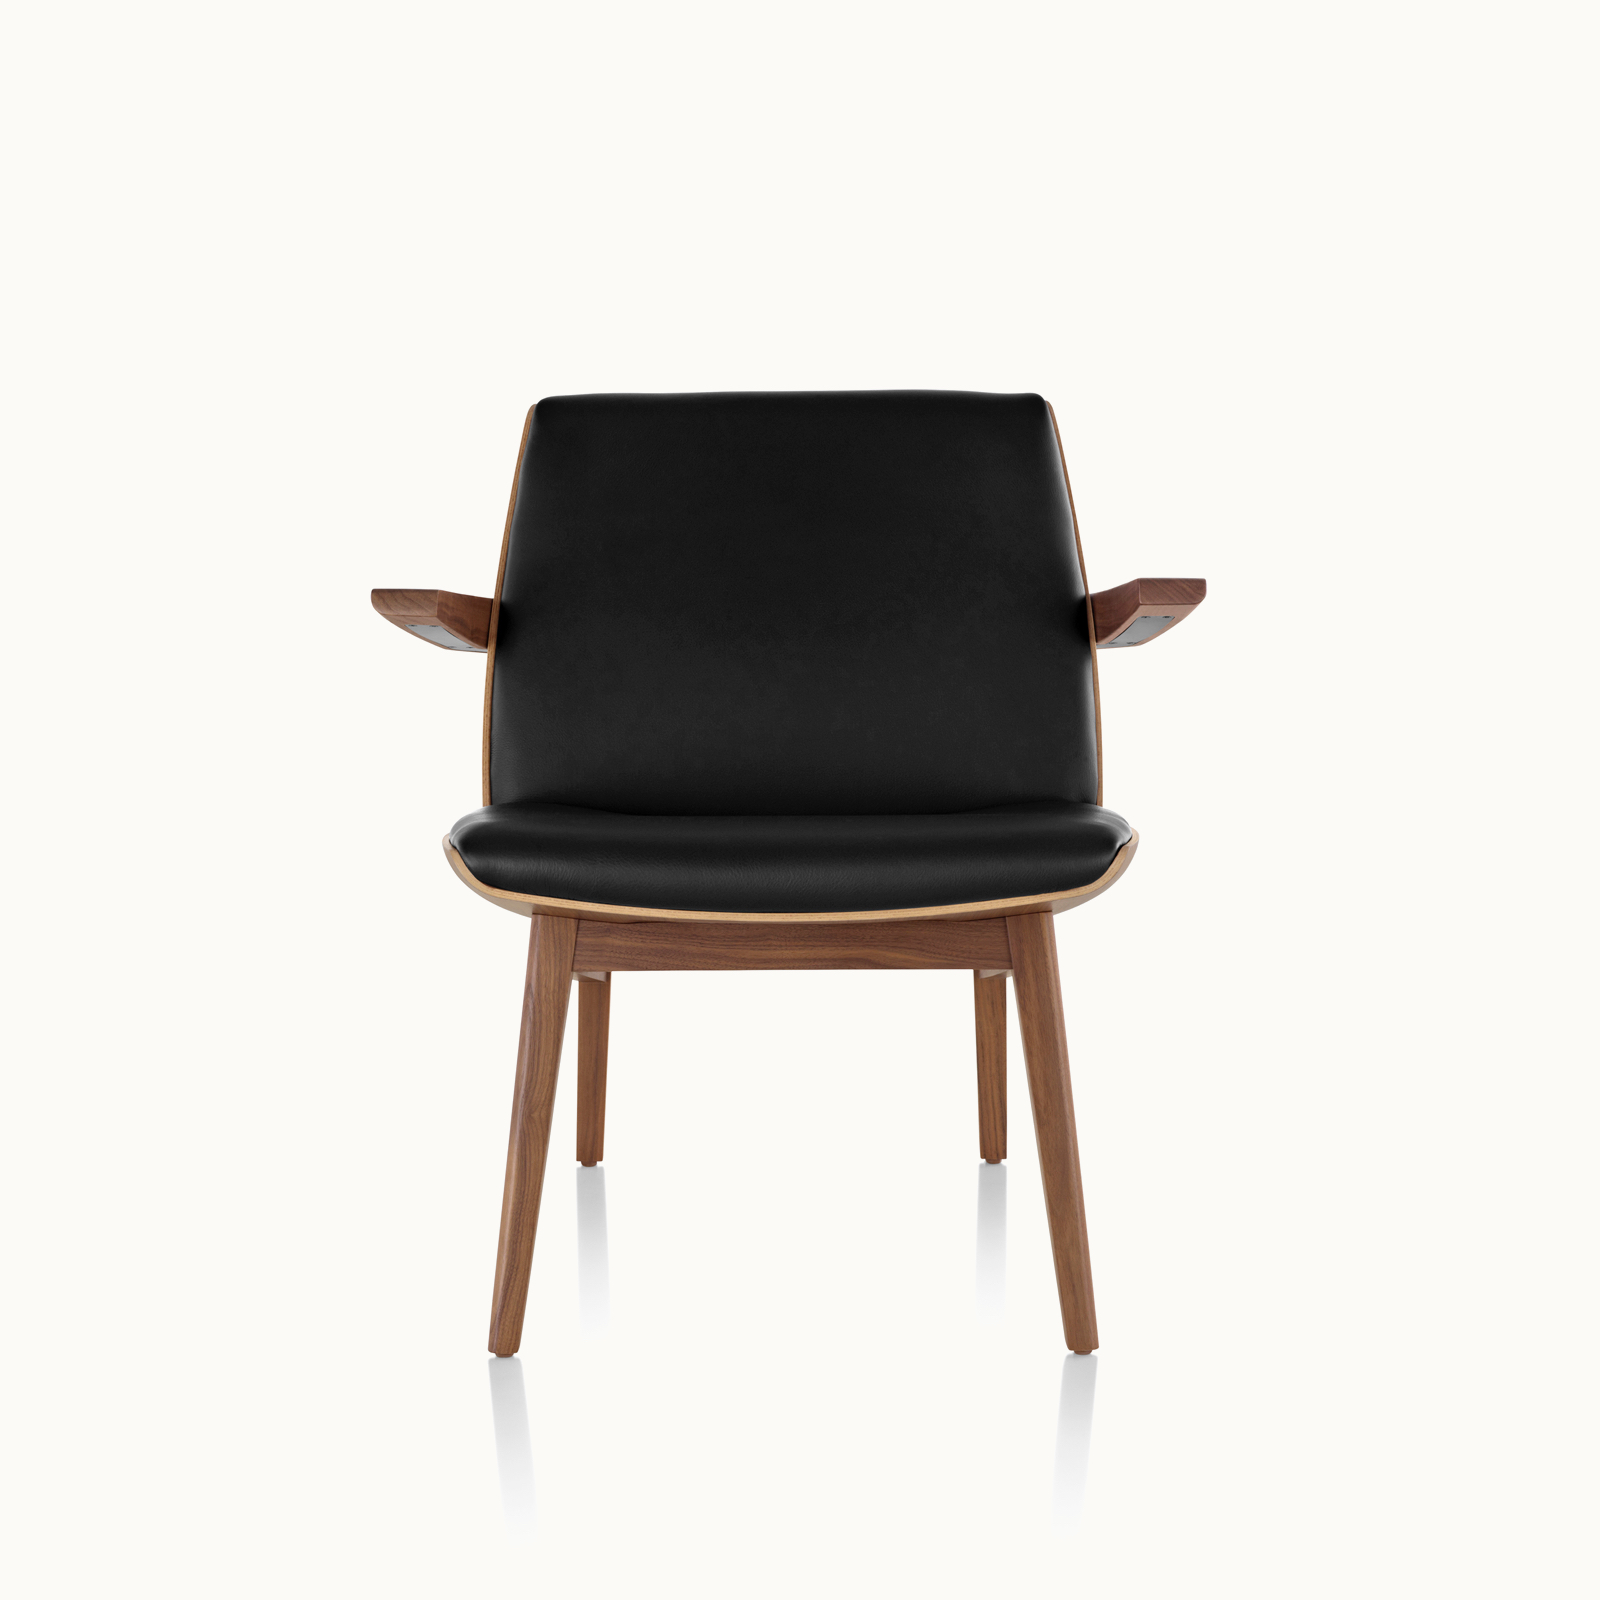 A low-back Clamshell Lounge Chair with black leather upholstery and four wood legs, viewed from the front.